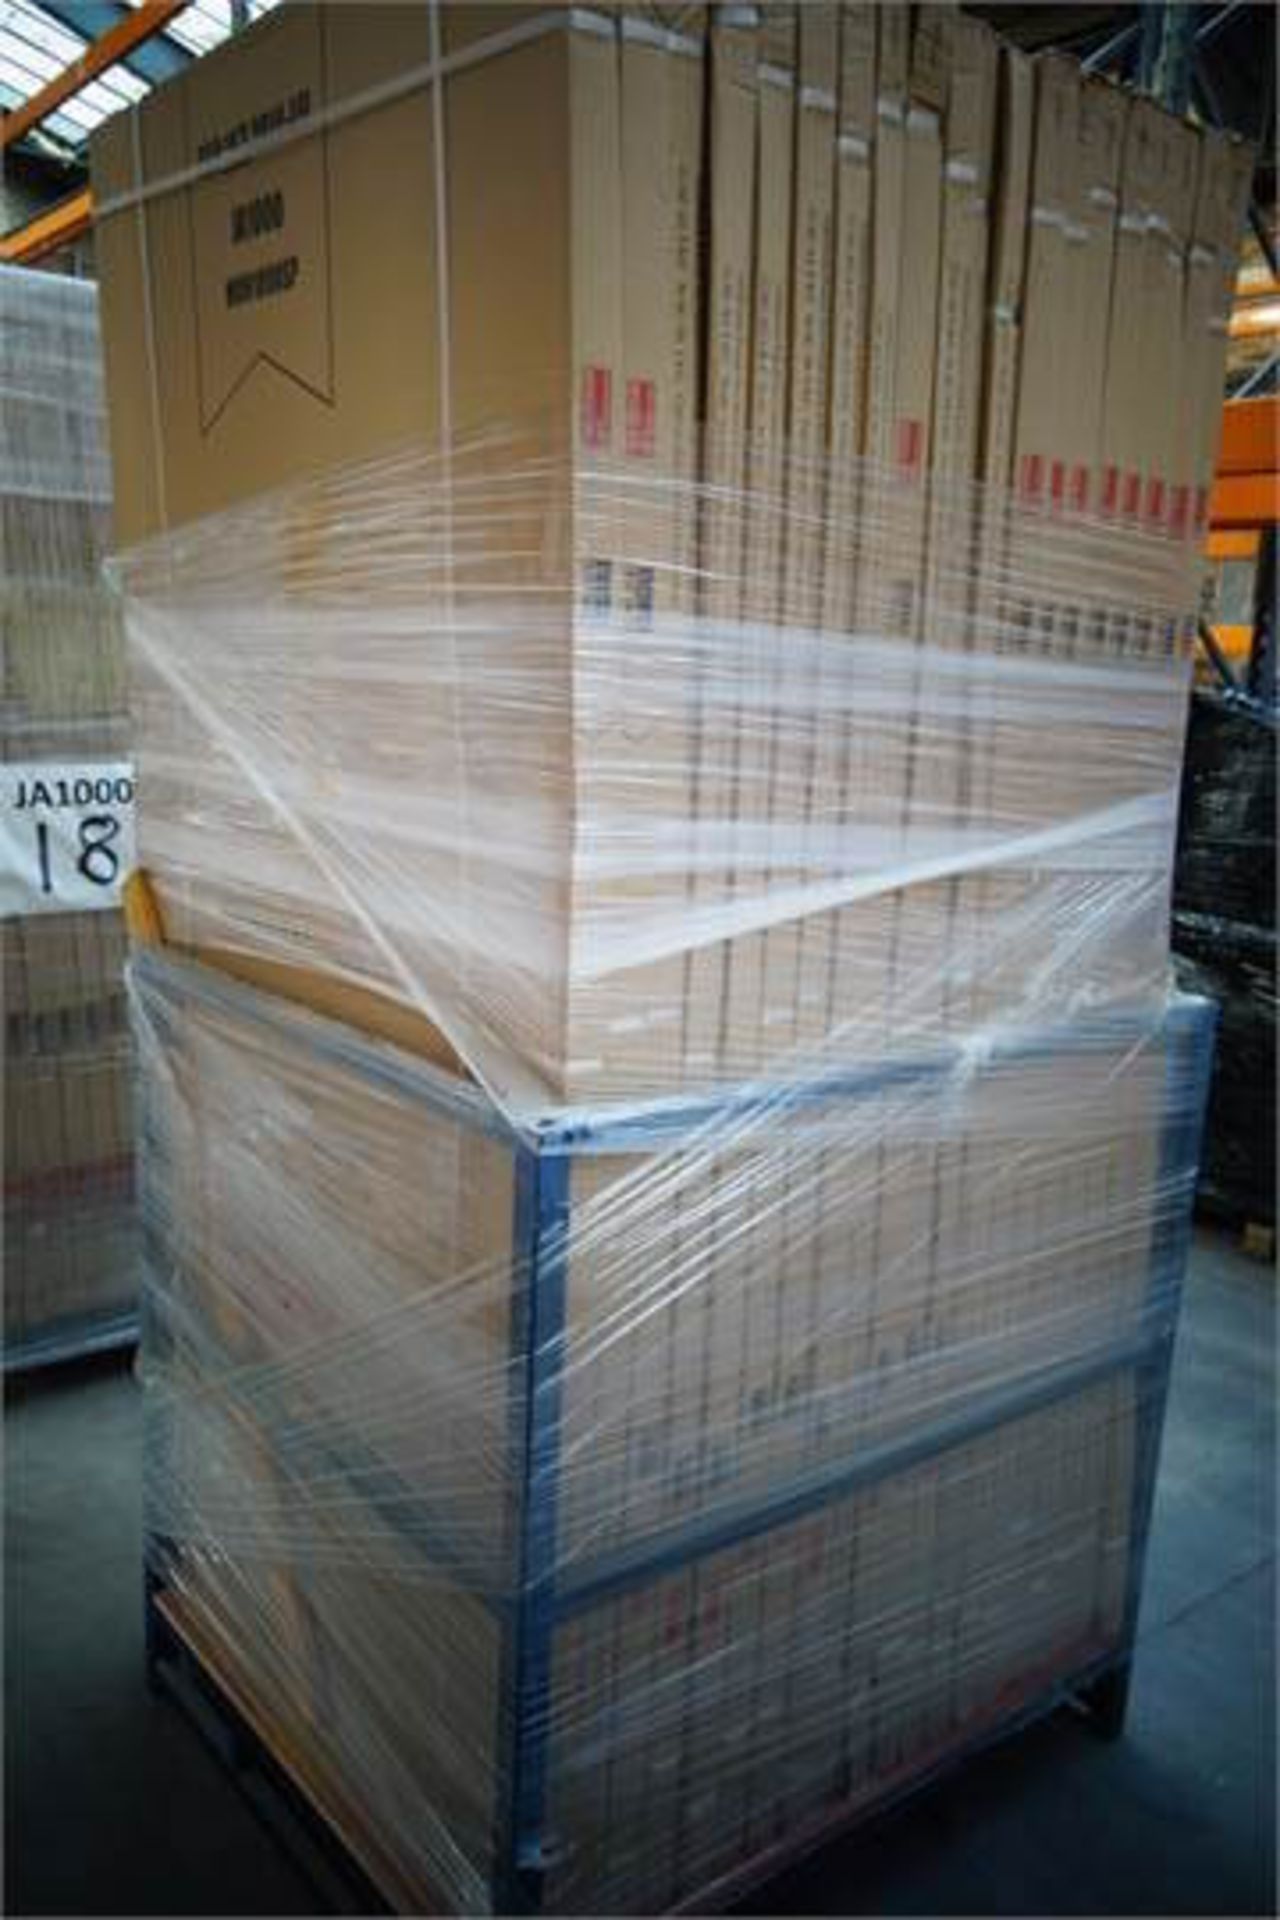 (B15) PALLET TO CONTAIN 20 x 1000MM BATHROOM SIDE PANELS.